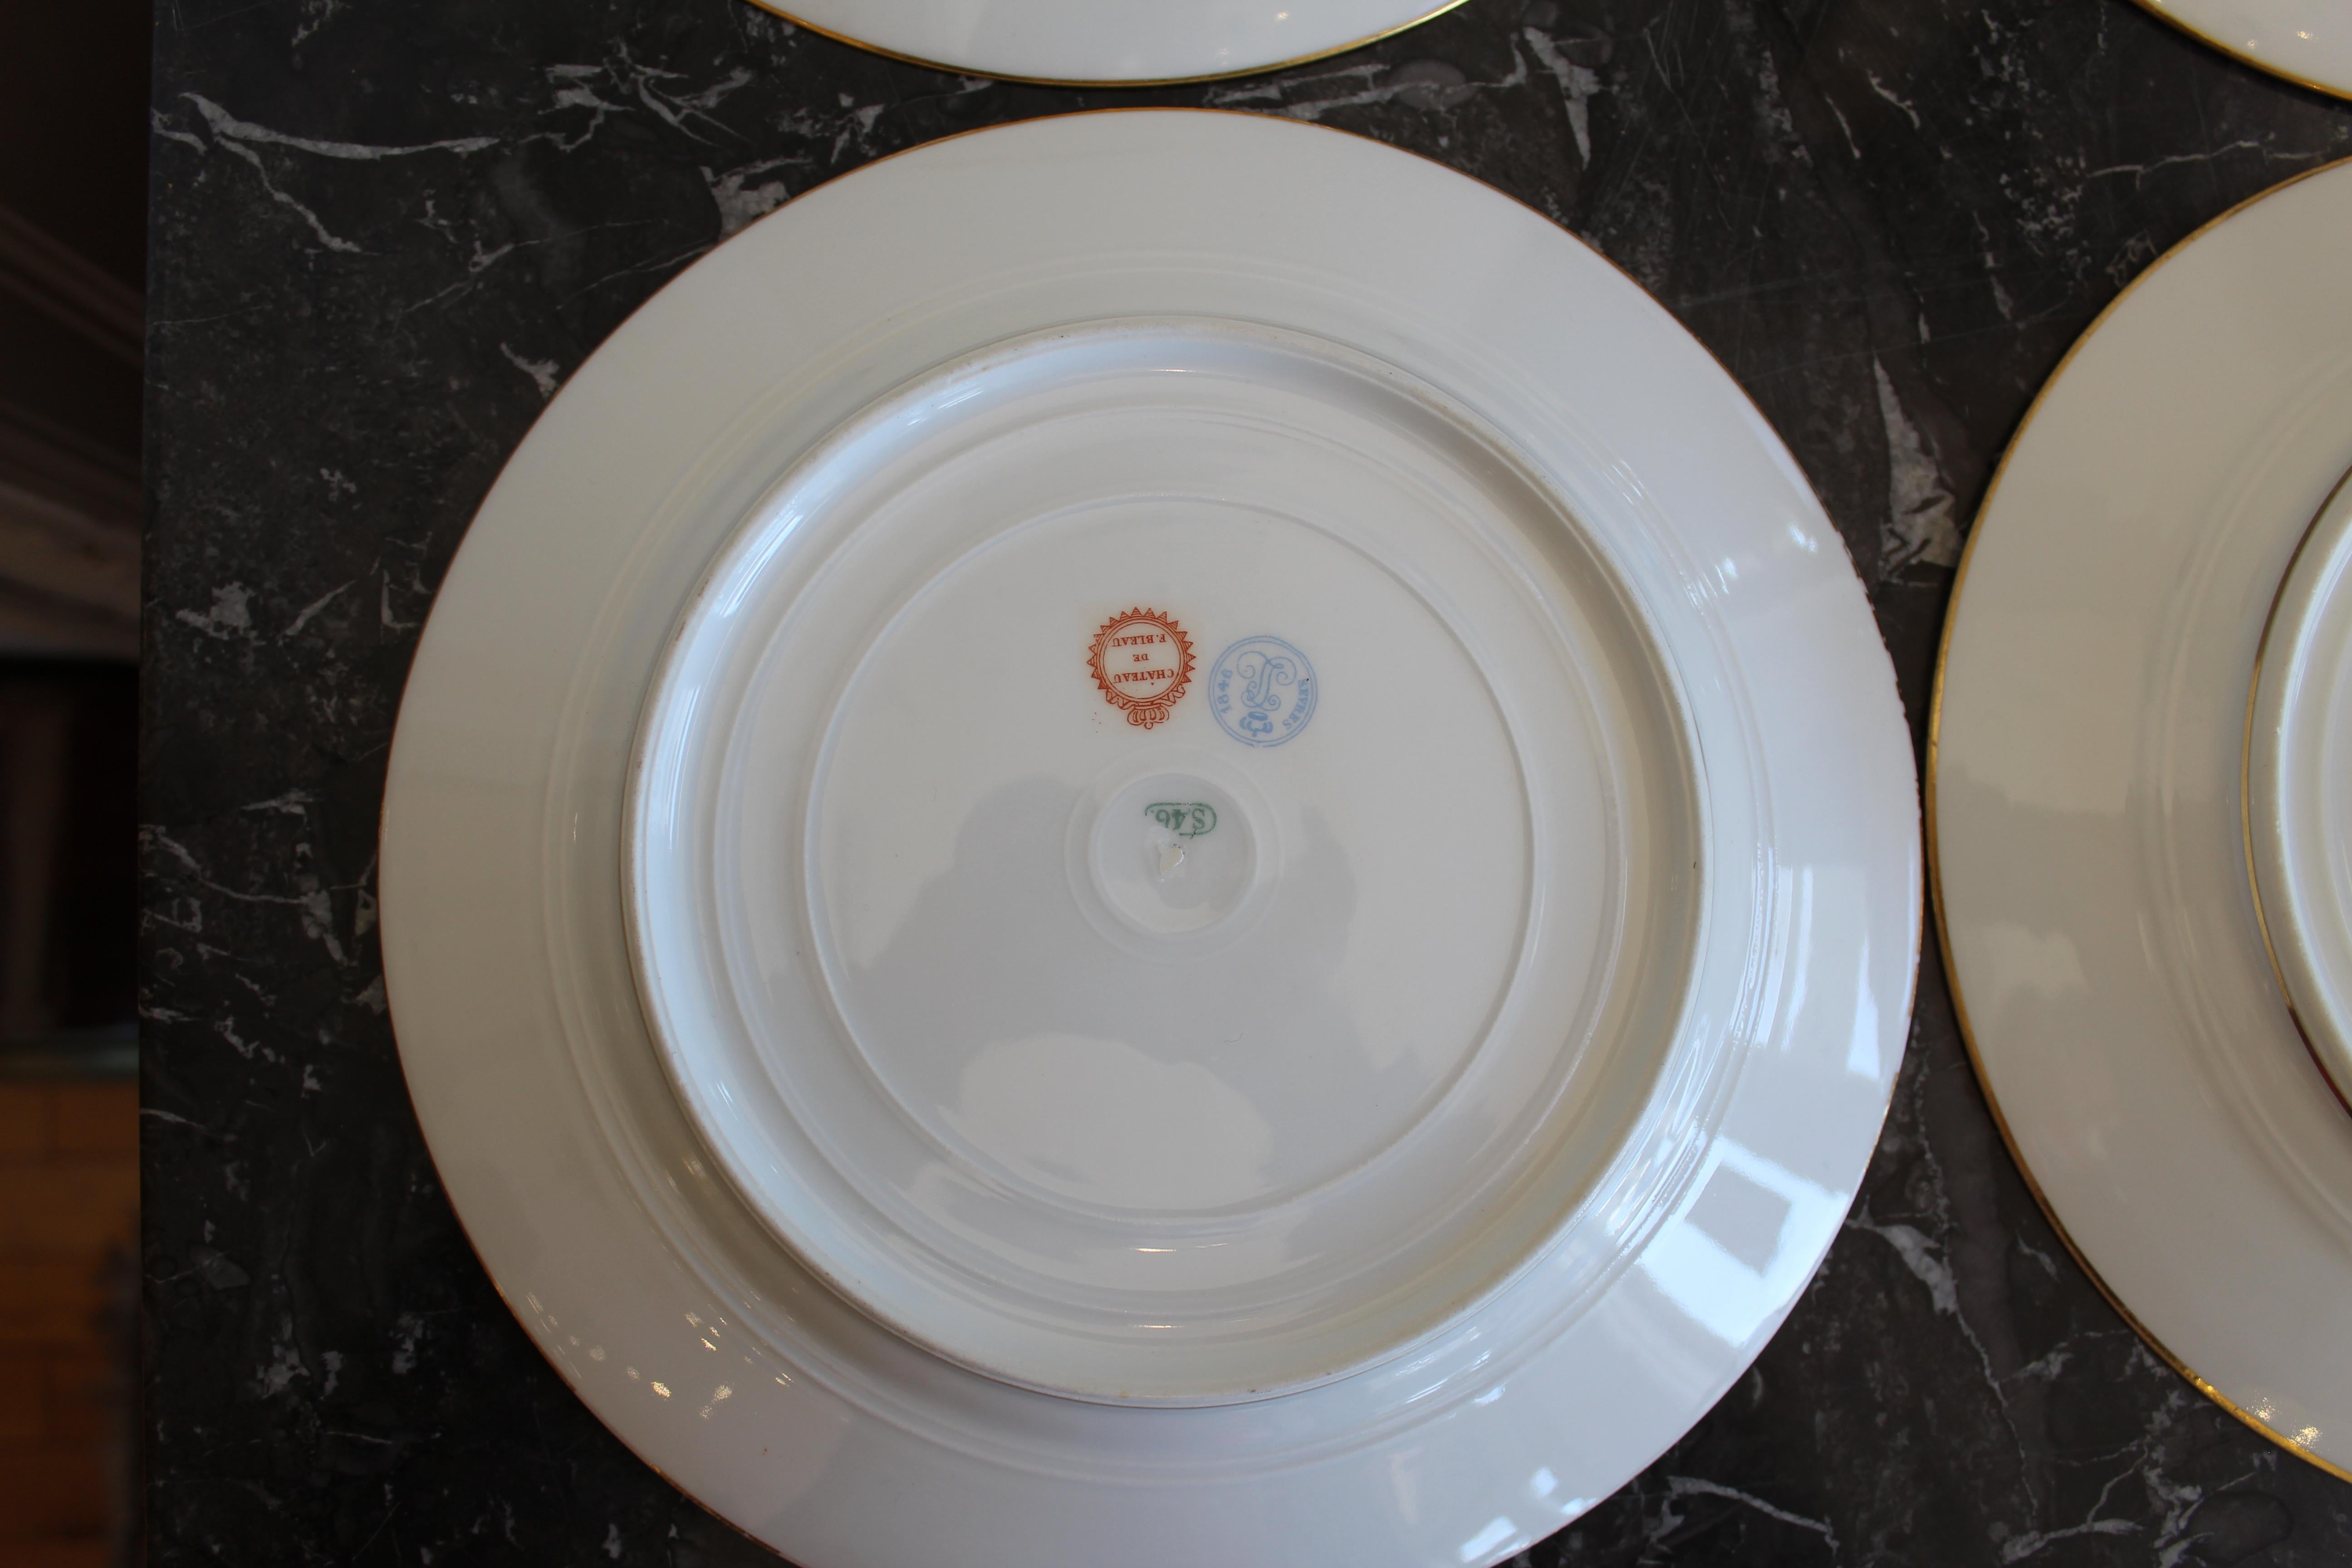  Sevres Chateau de Fountainbleu Pattern French Dinner or Cabinet Plates: 6 1